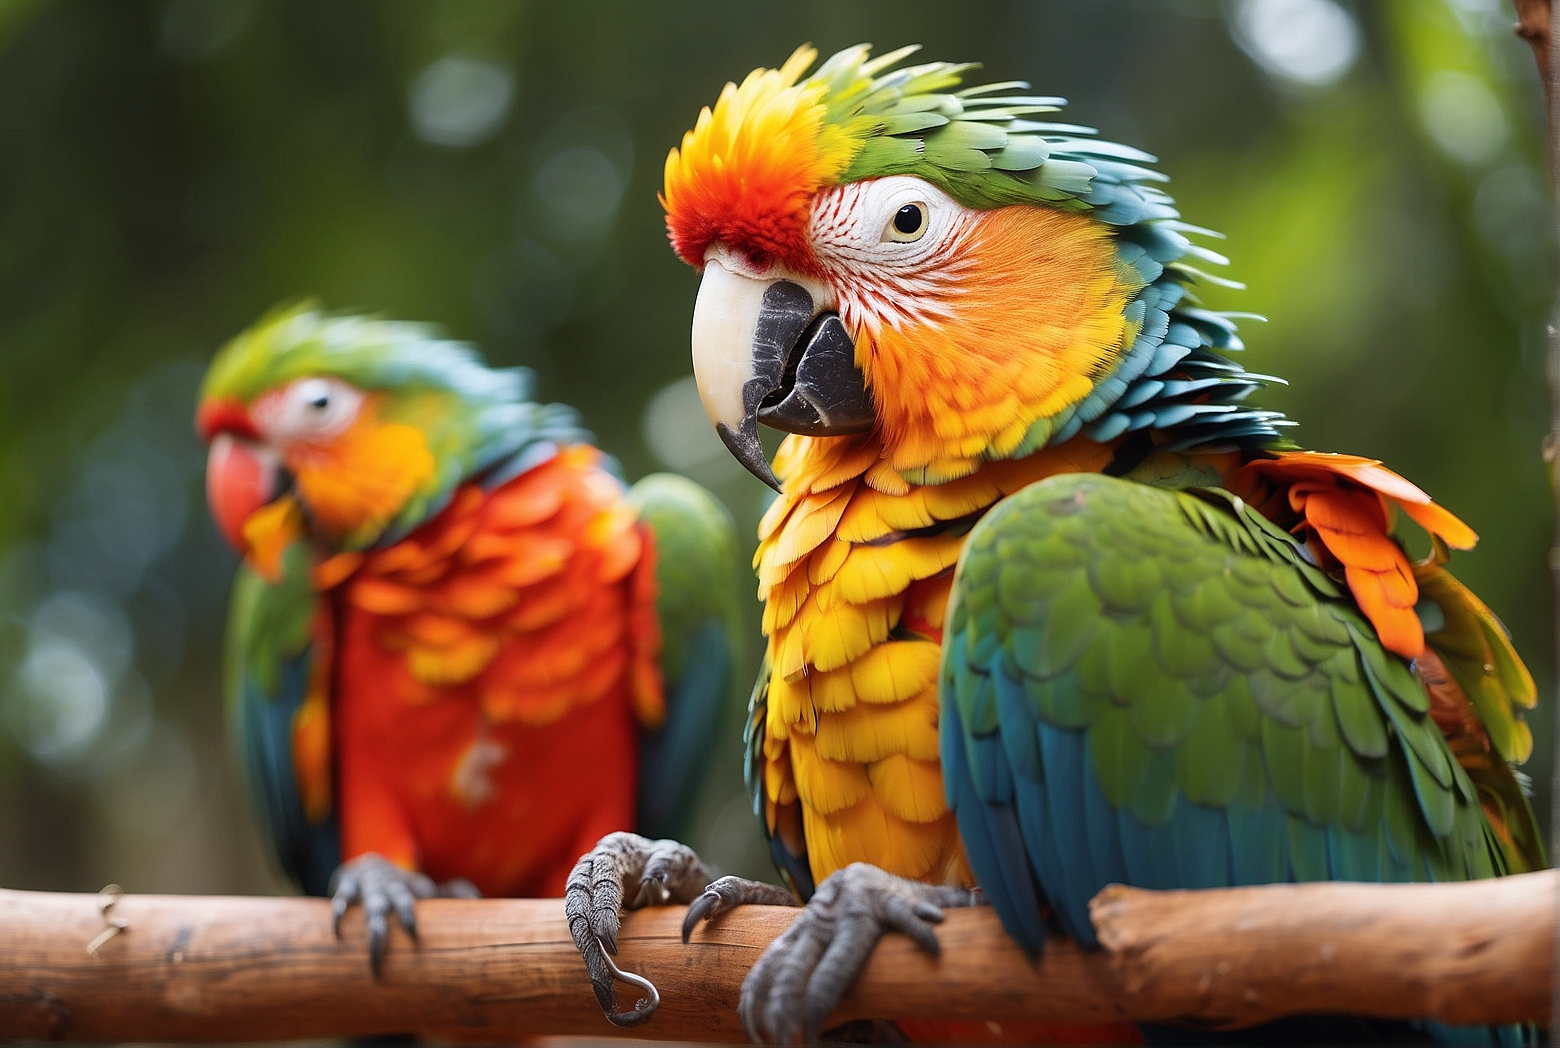 How long can a parrot survive without food?